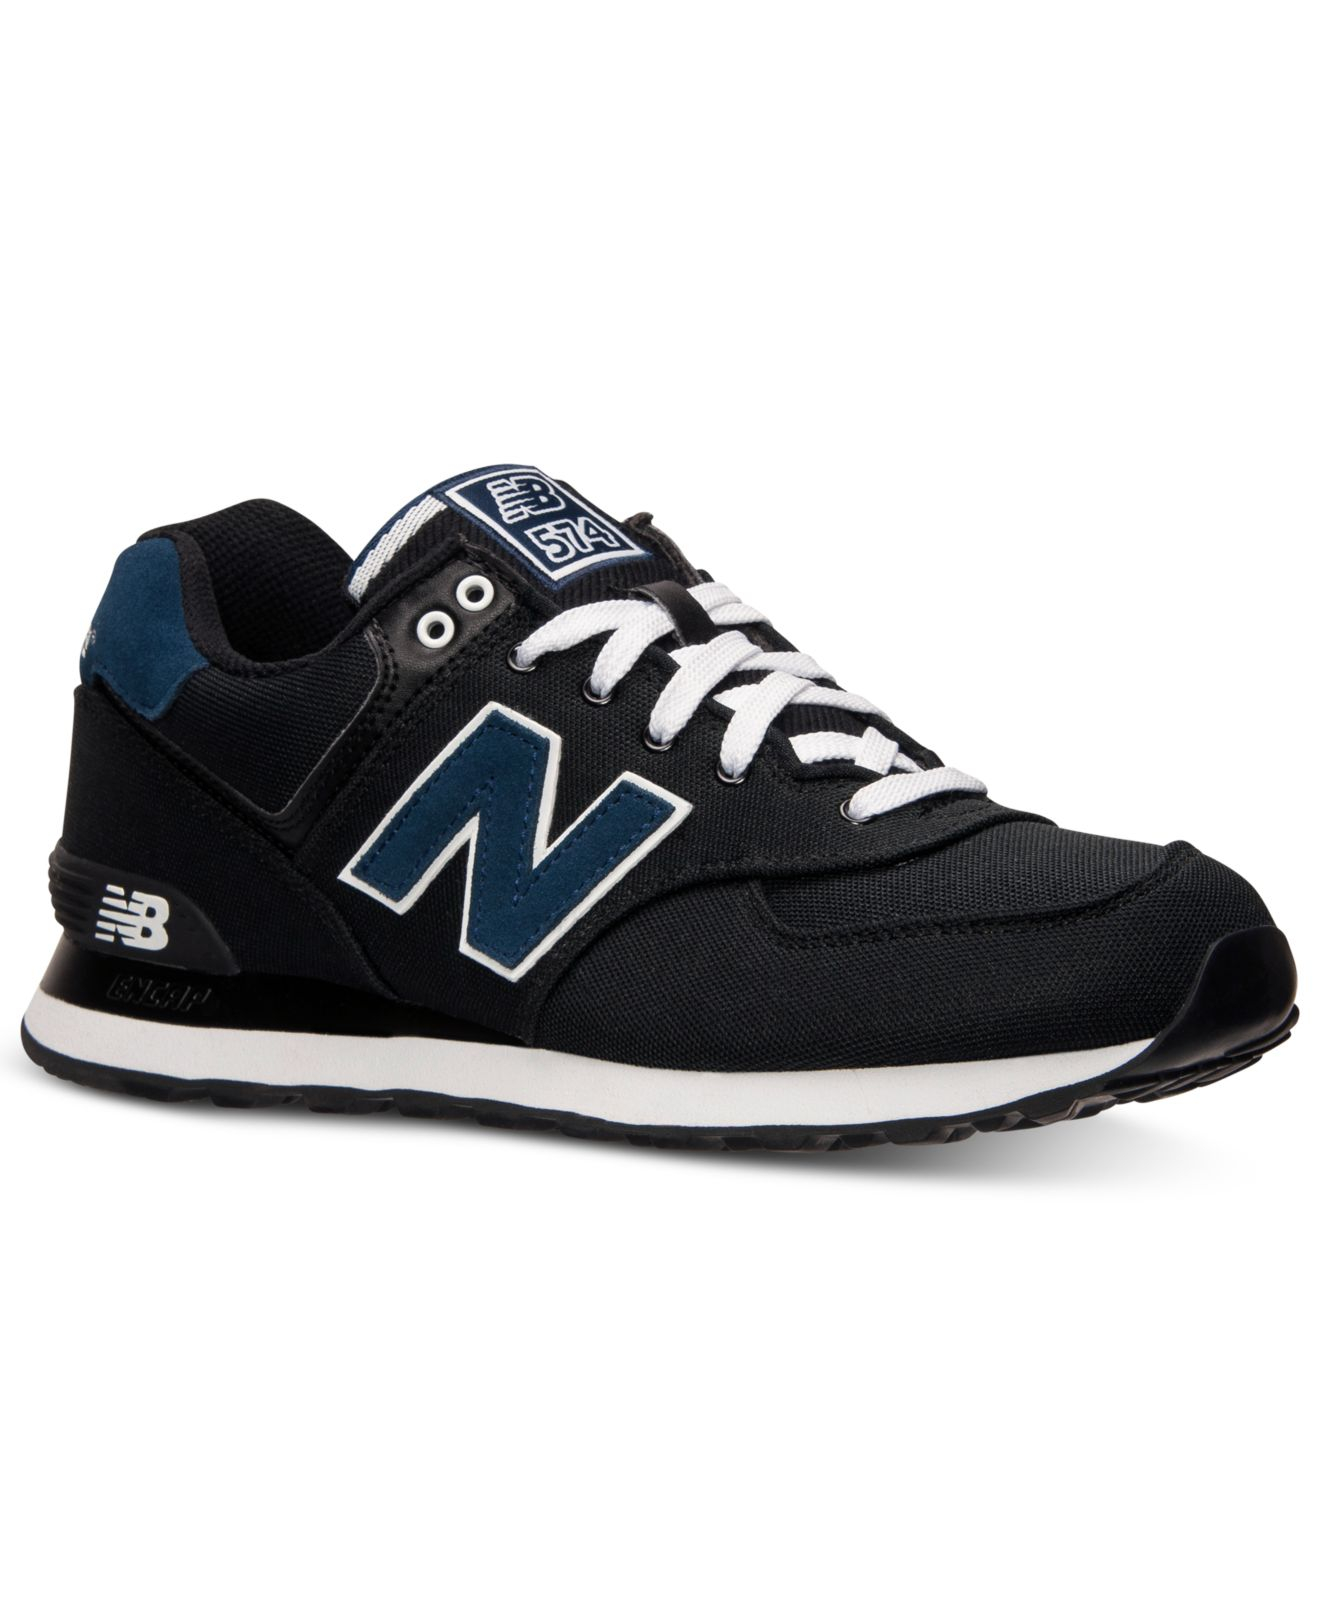 Lyst - New balance Men's 574 Pique Polo Casual Sneakers From Finish ...